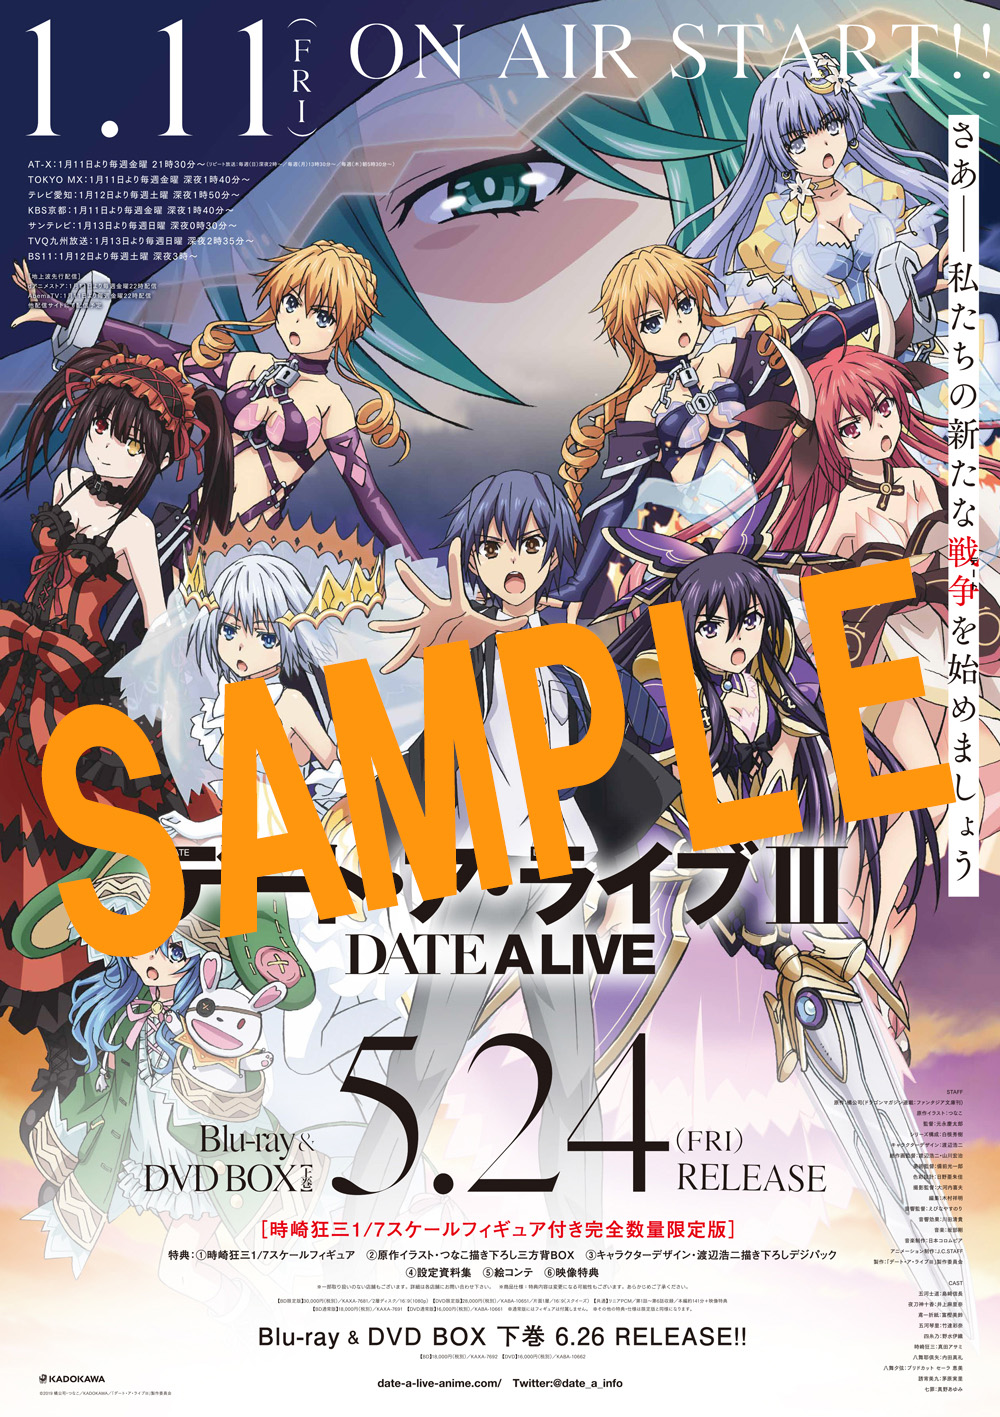 TVアニメ『デート・ア・ライブ DATE A LIVEⅢ』にて（Blu-ray/DVD 